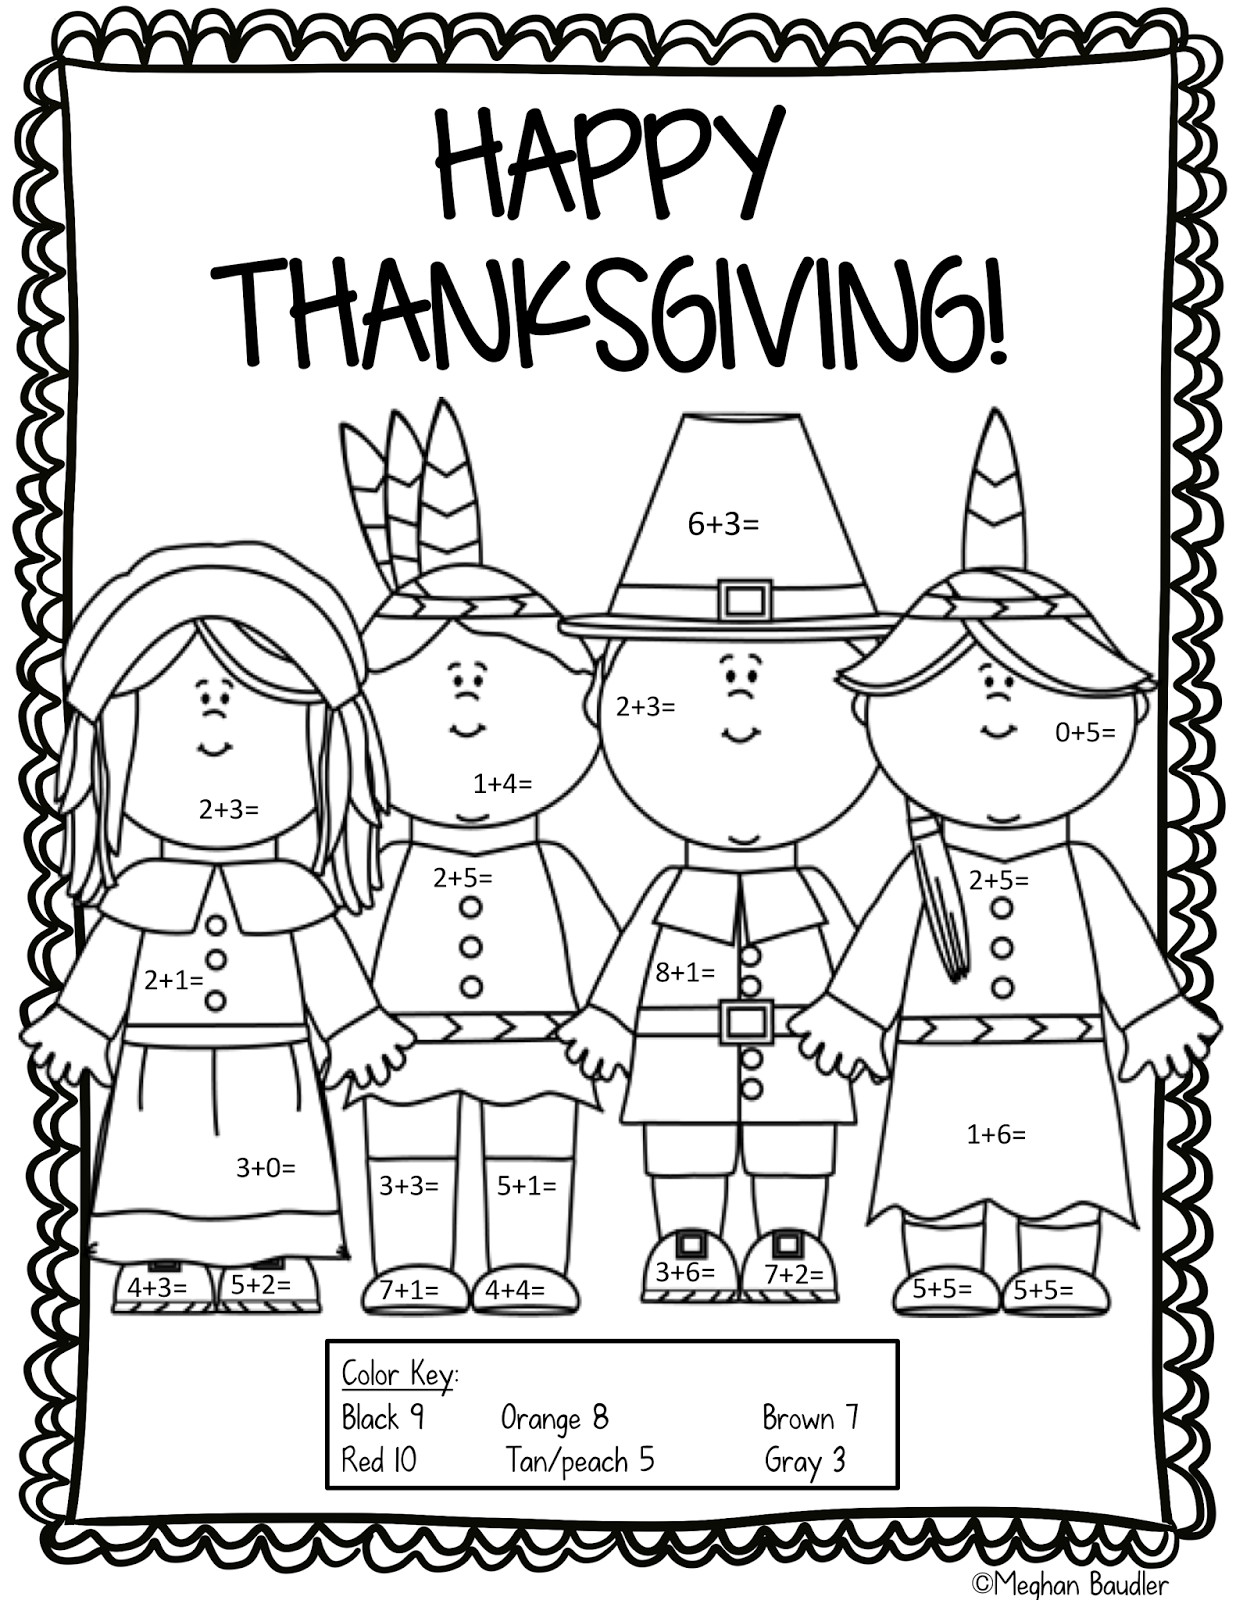 Activities For Thanksgiving
 The Creative Colorful Classroom Thanksgiving Activities